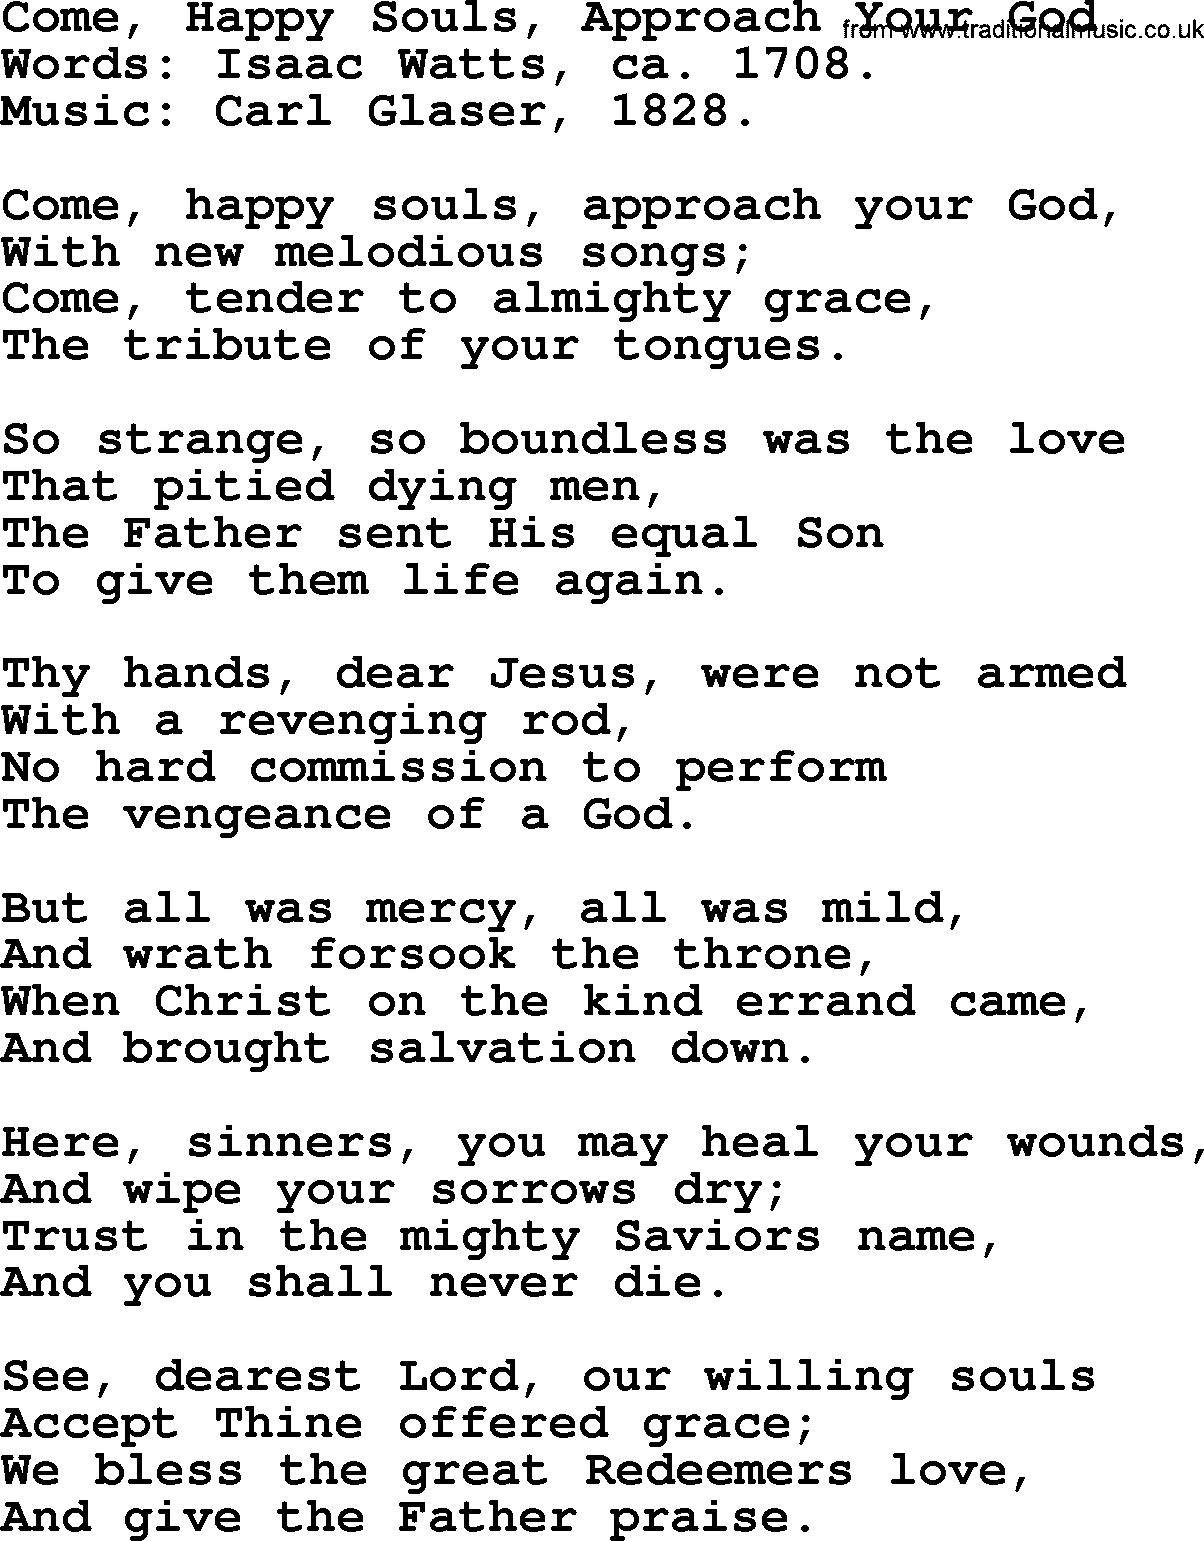 Isaac Watts Christian hymn: Come, Happy Souls, Approach Your God- lyricss